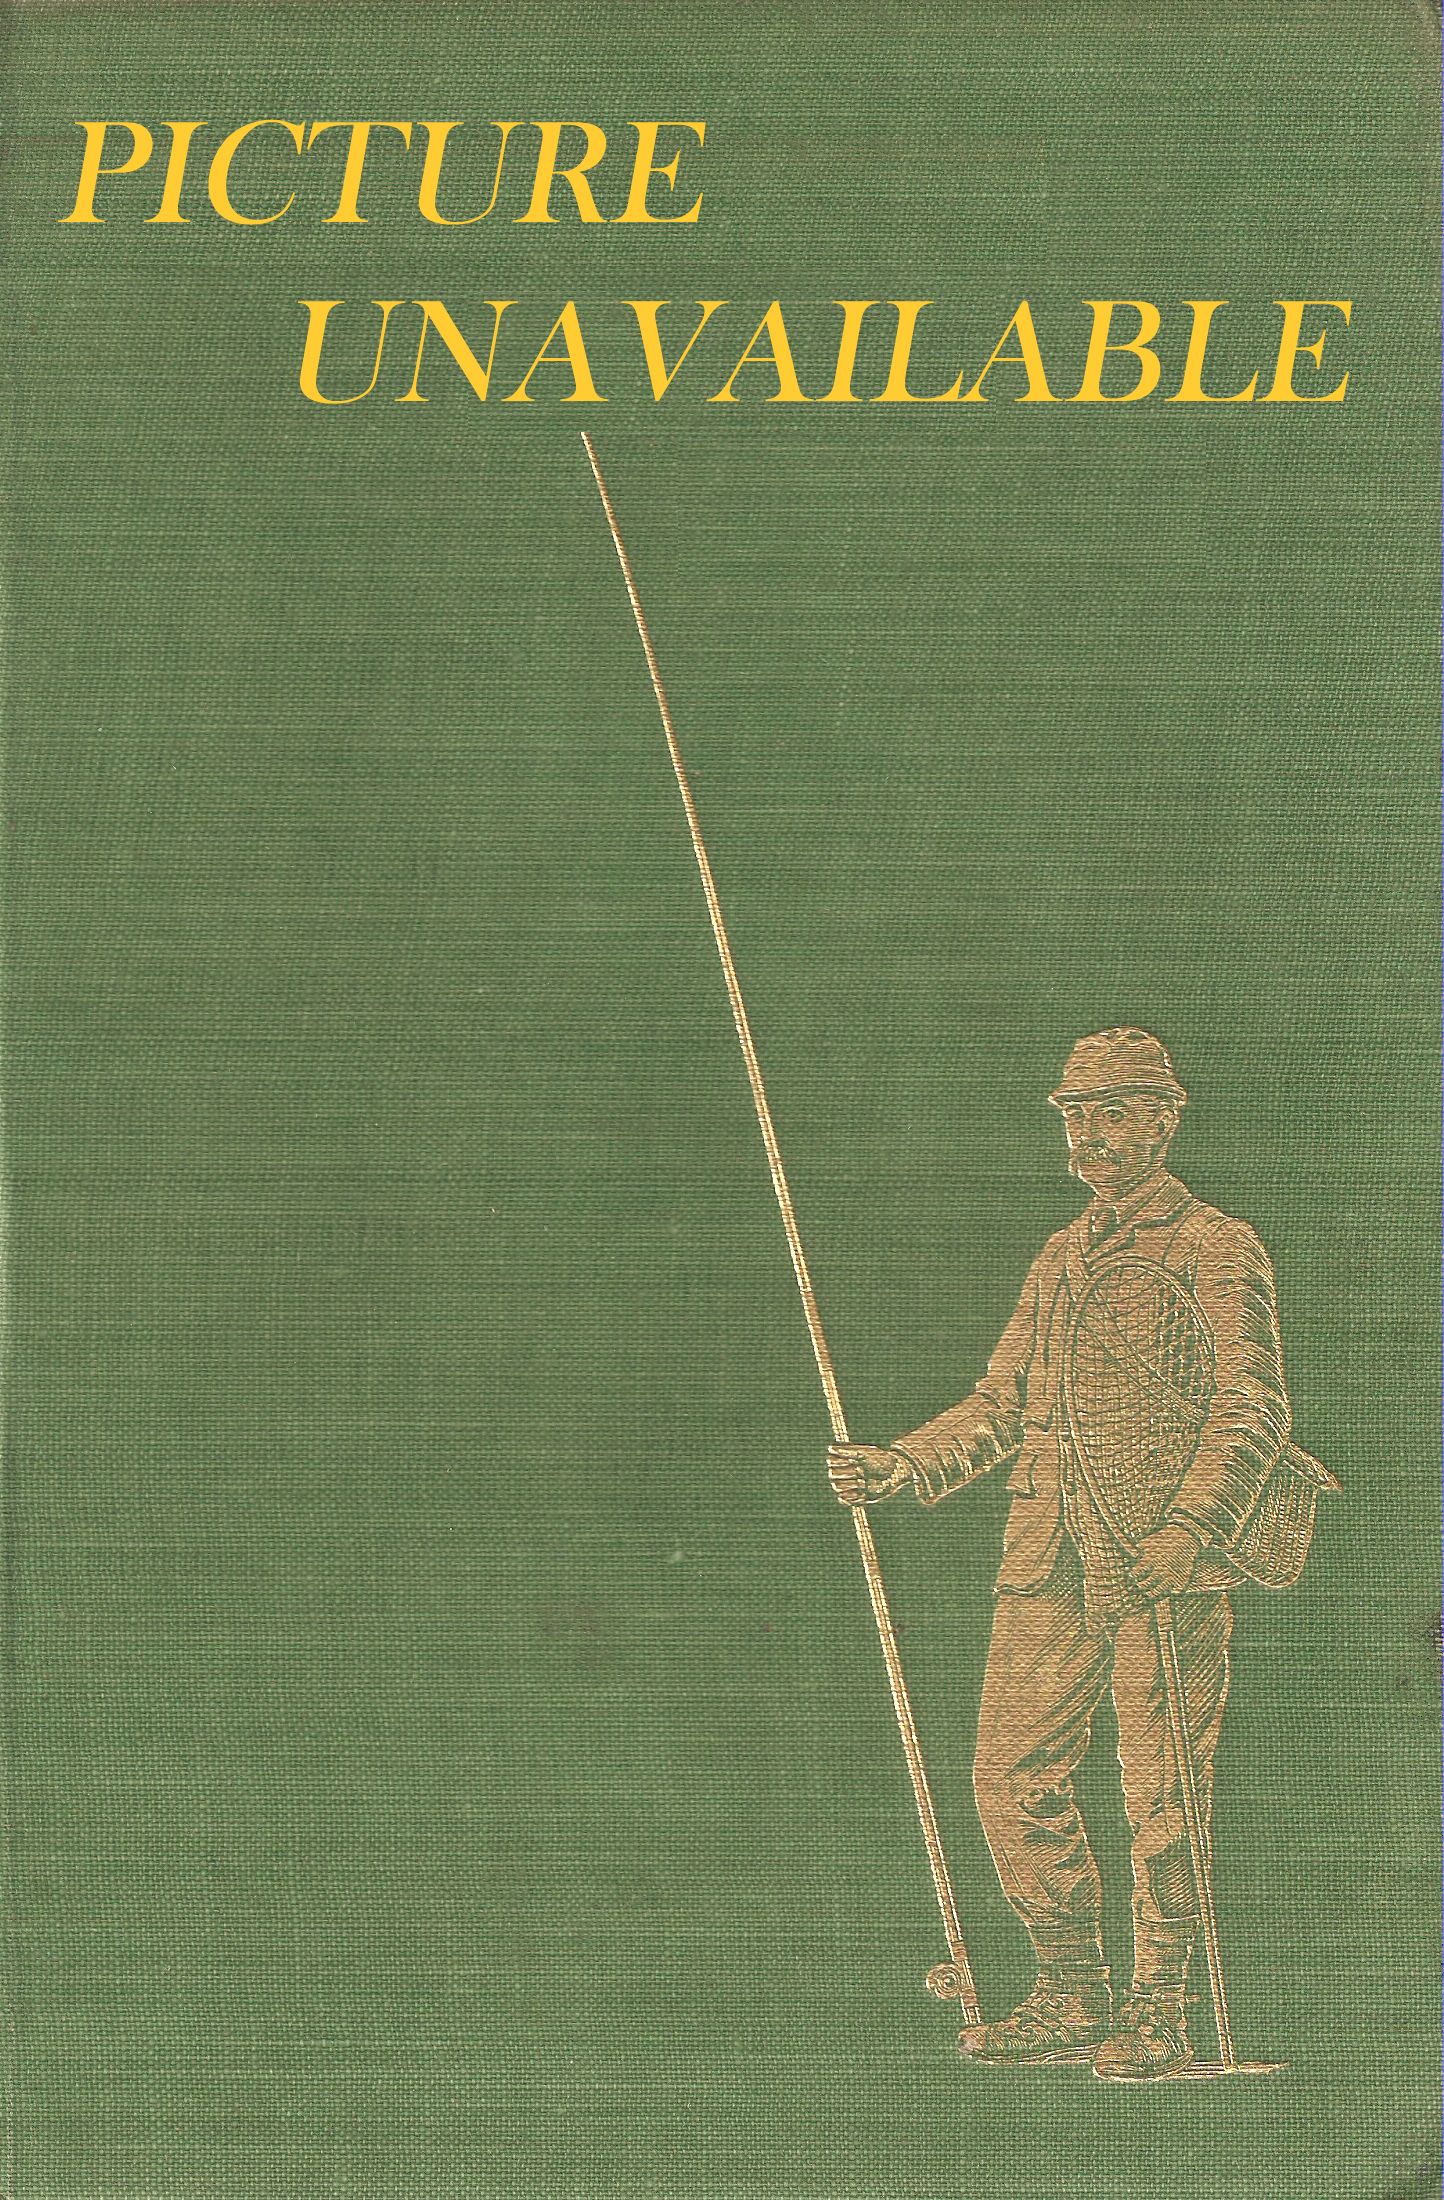 A TREASURY OF FISHING STORIES. Compiled by Charles E. Goodspeed.  Illustrated by Everett Ward.